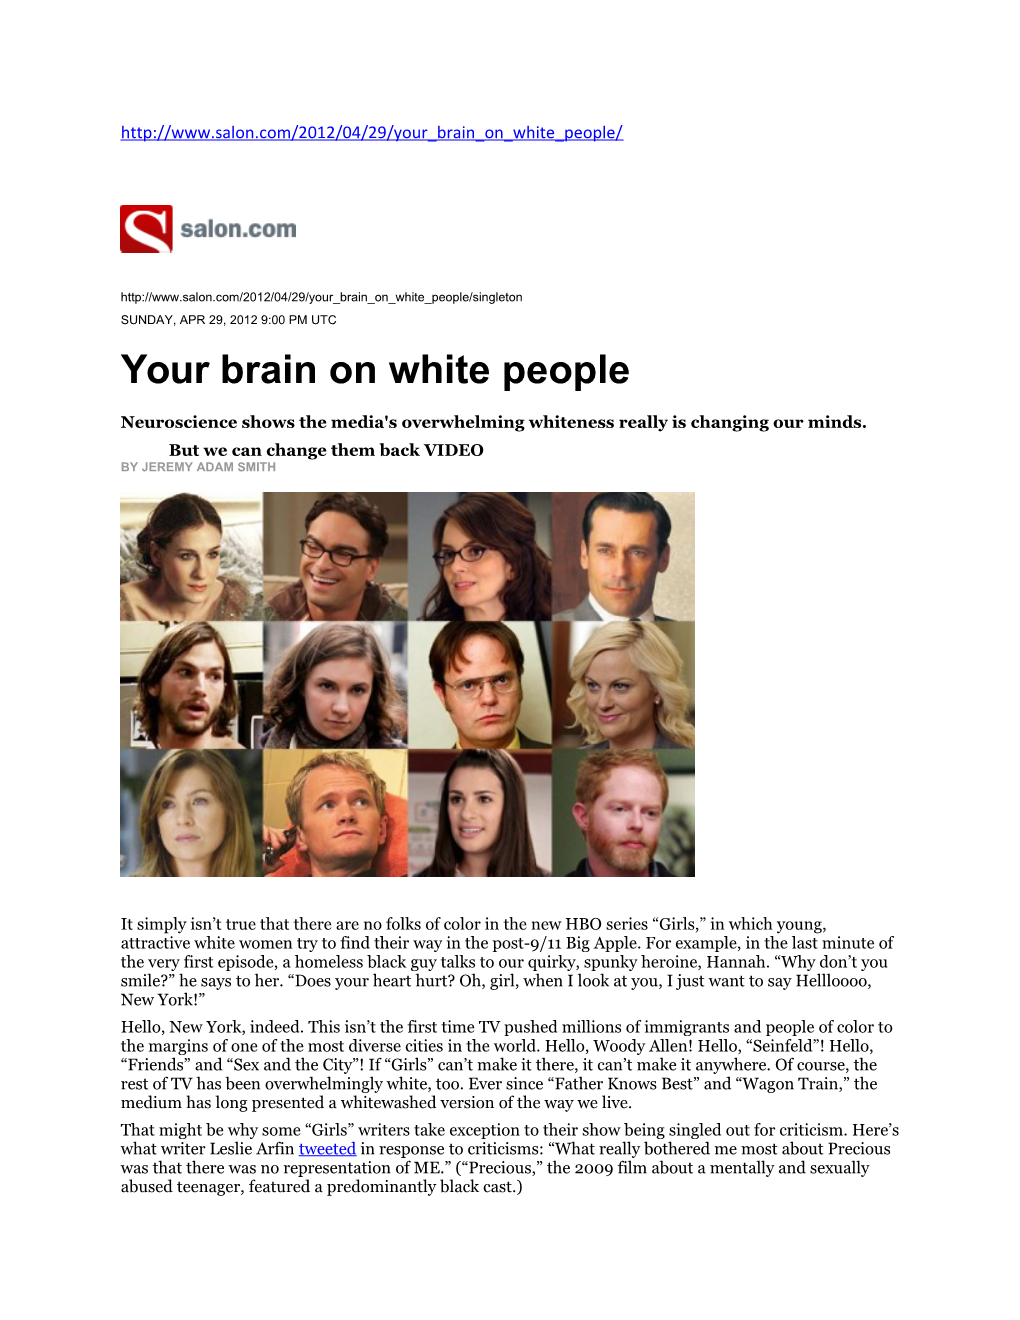 Your Brain on White People